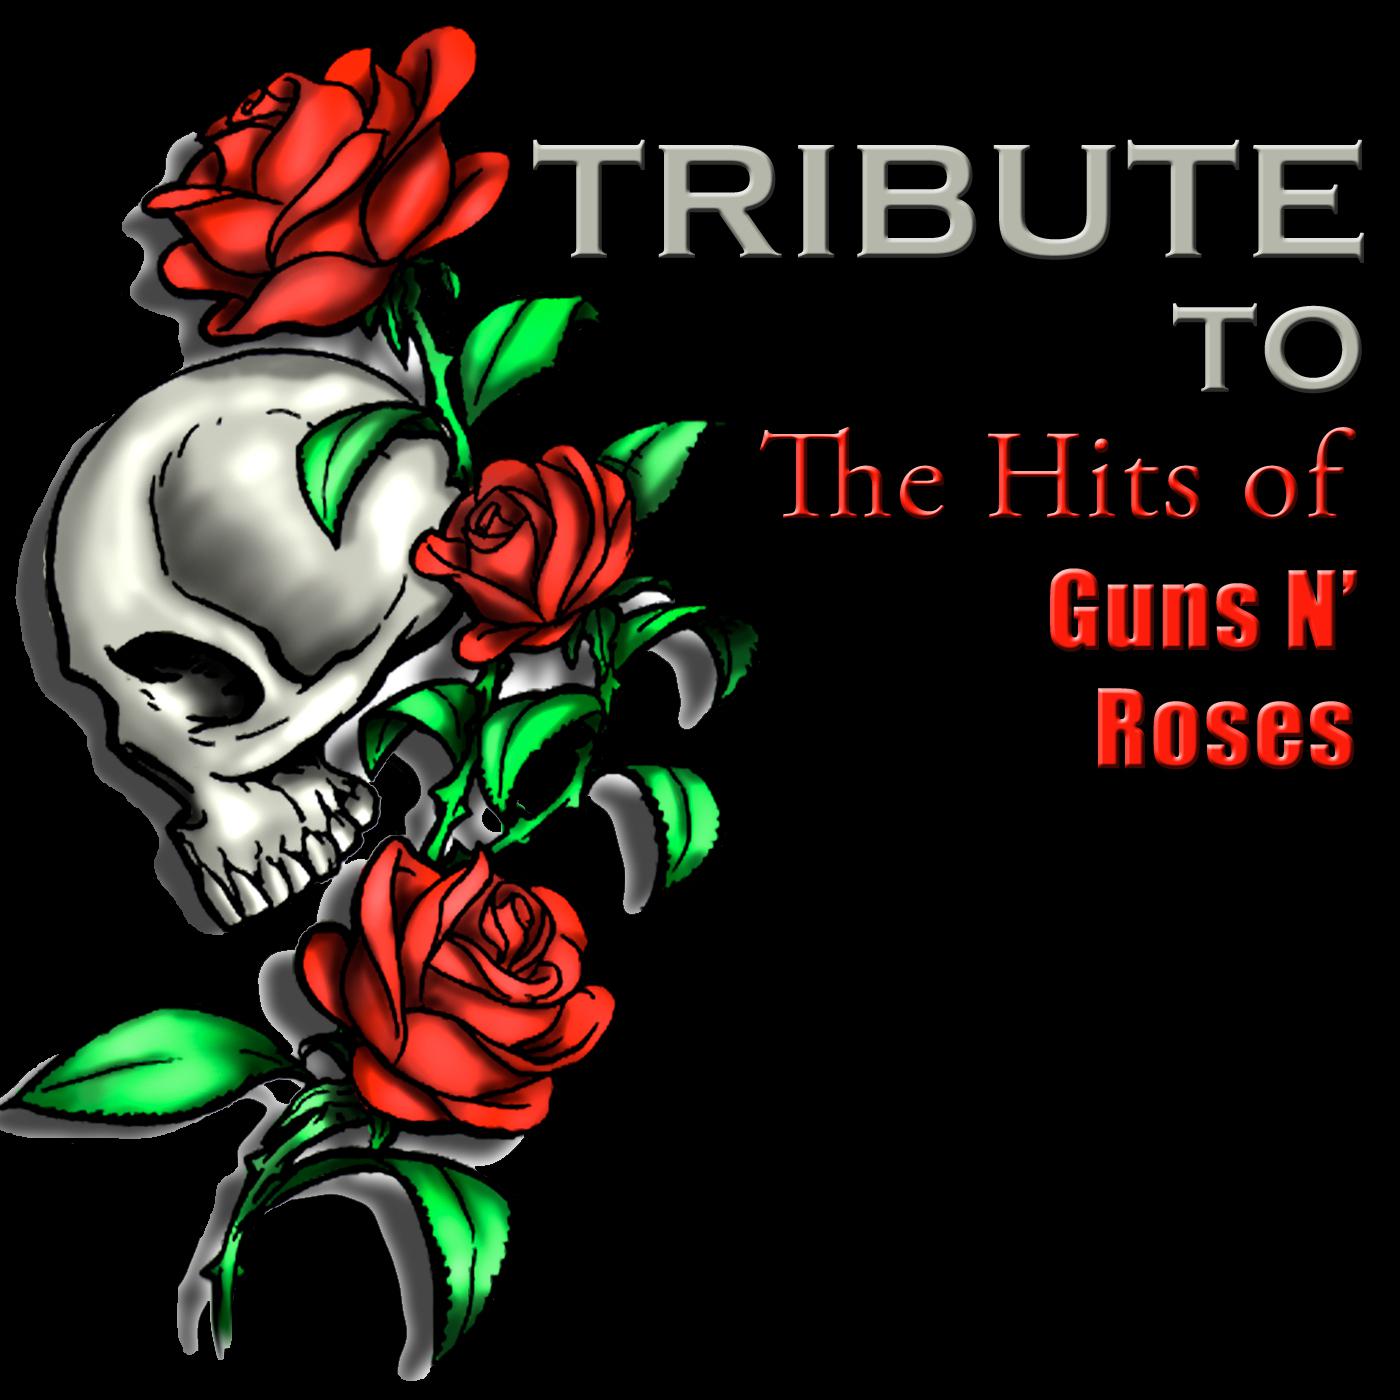 Tribute To The Hits Of Guns N' Roses